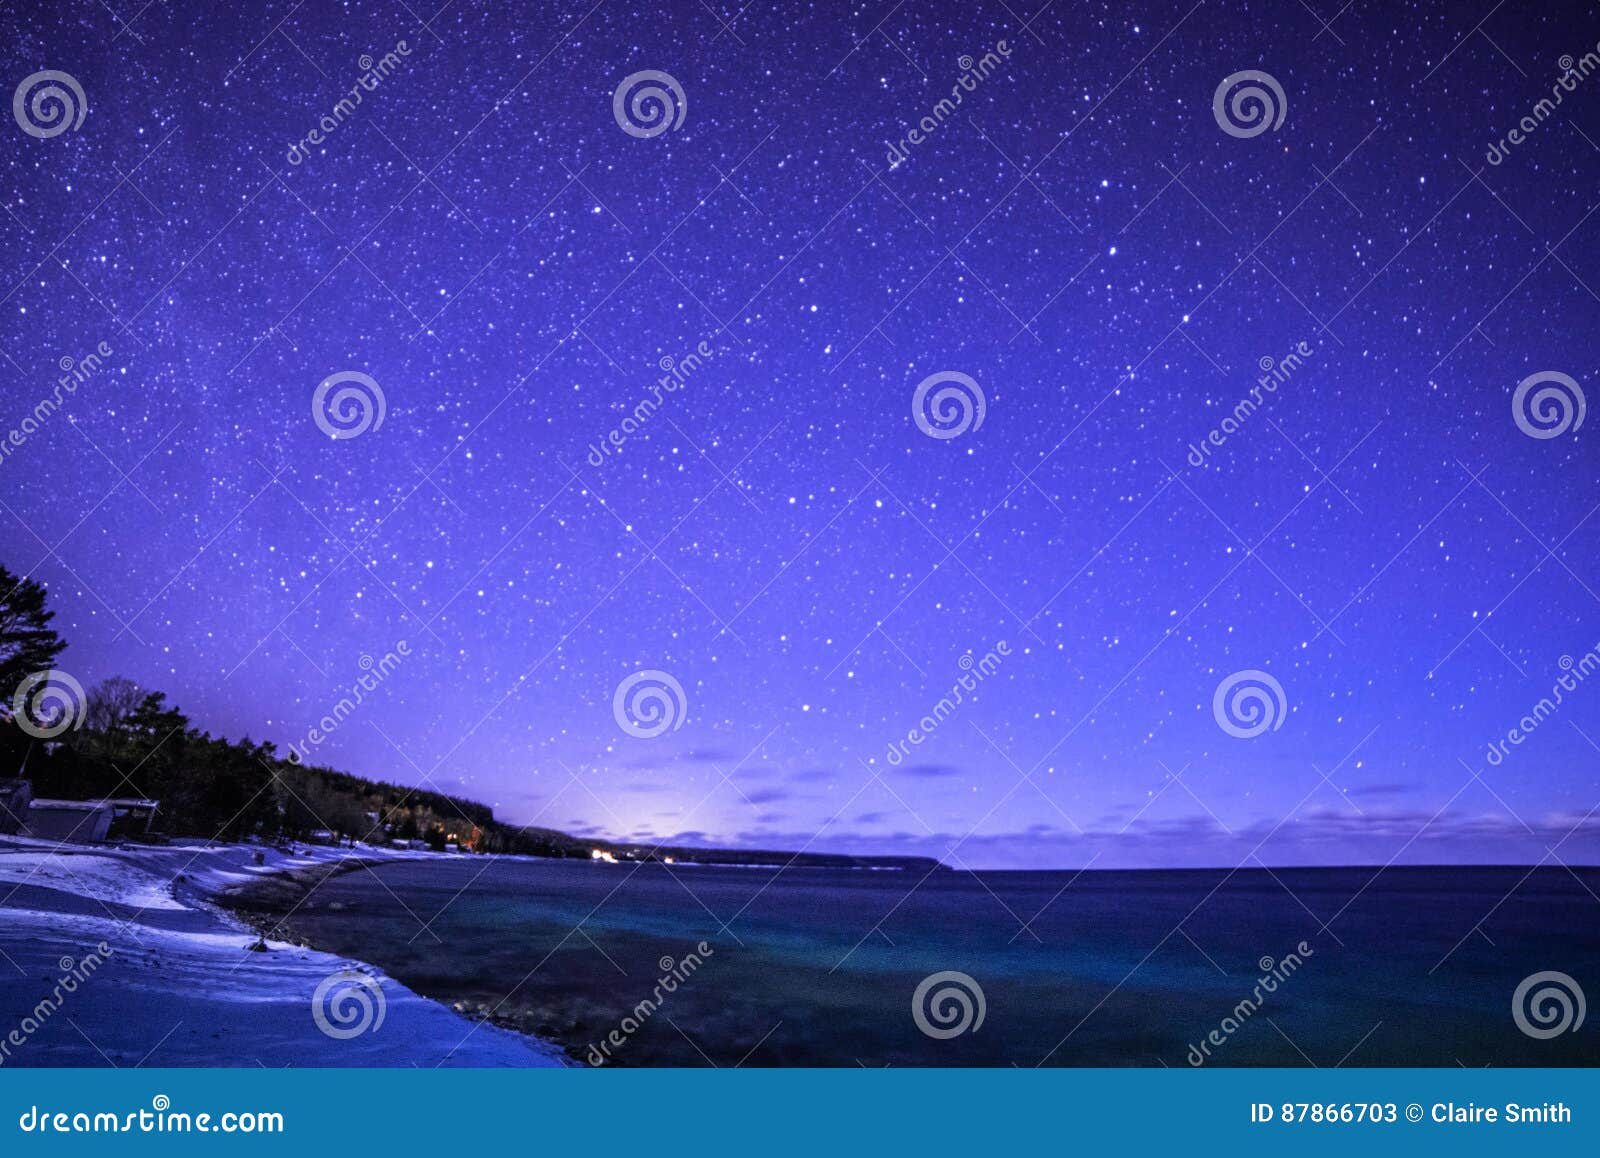 dyers bay, bruce peninsula at night time with milky way and star